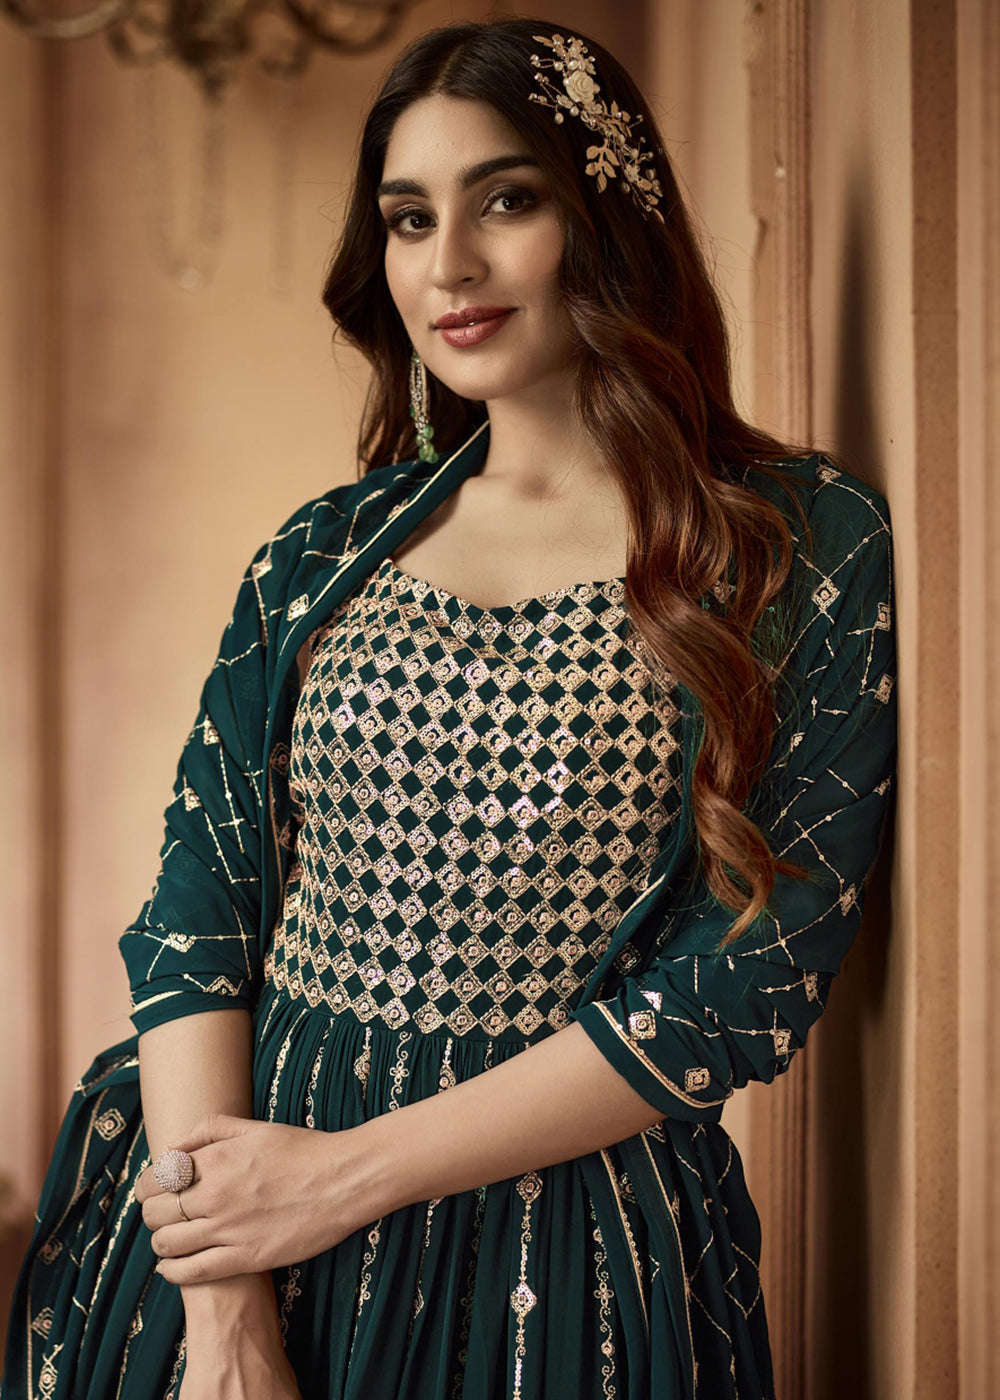 Buy Now Imperial Bottle Green Sequins Wedding Festive Anarkali Suit Online in USA, UK, Australia, New Zealand, Canada & Worldwide at Empress Clothing.